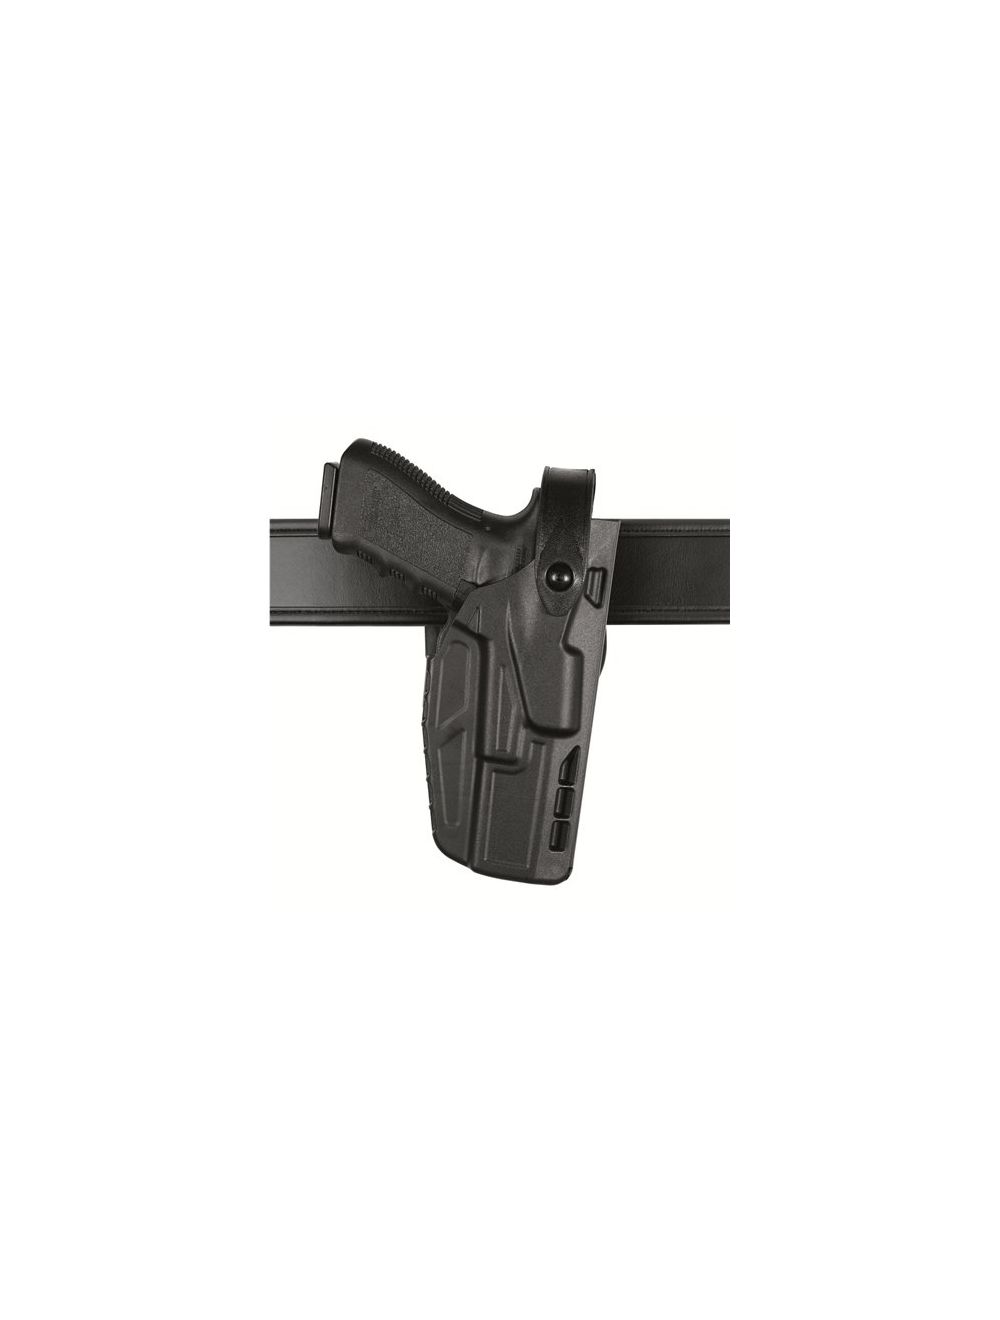 Model 7280 7TS SLS Mid-Ride, Level II Retention Duty Holster for Sig Sauer P320 9C